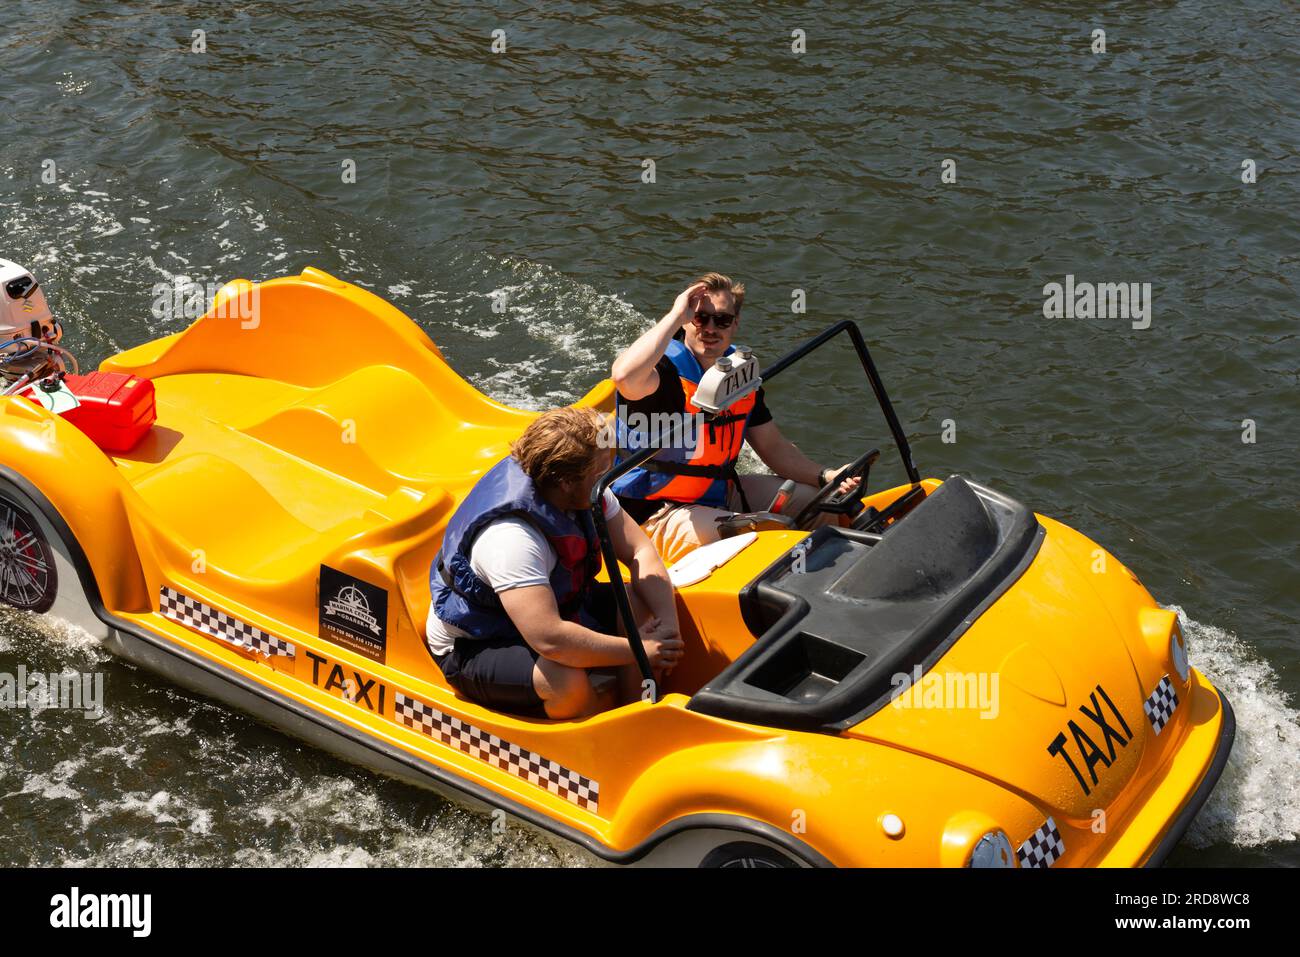 Male tourists in small yellow motorboat taxi on the Motlawa River in the Old Town of Gdansk, Poland Stock Photo